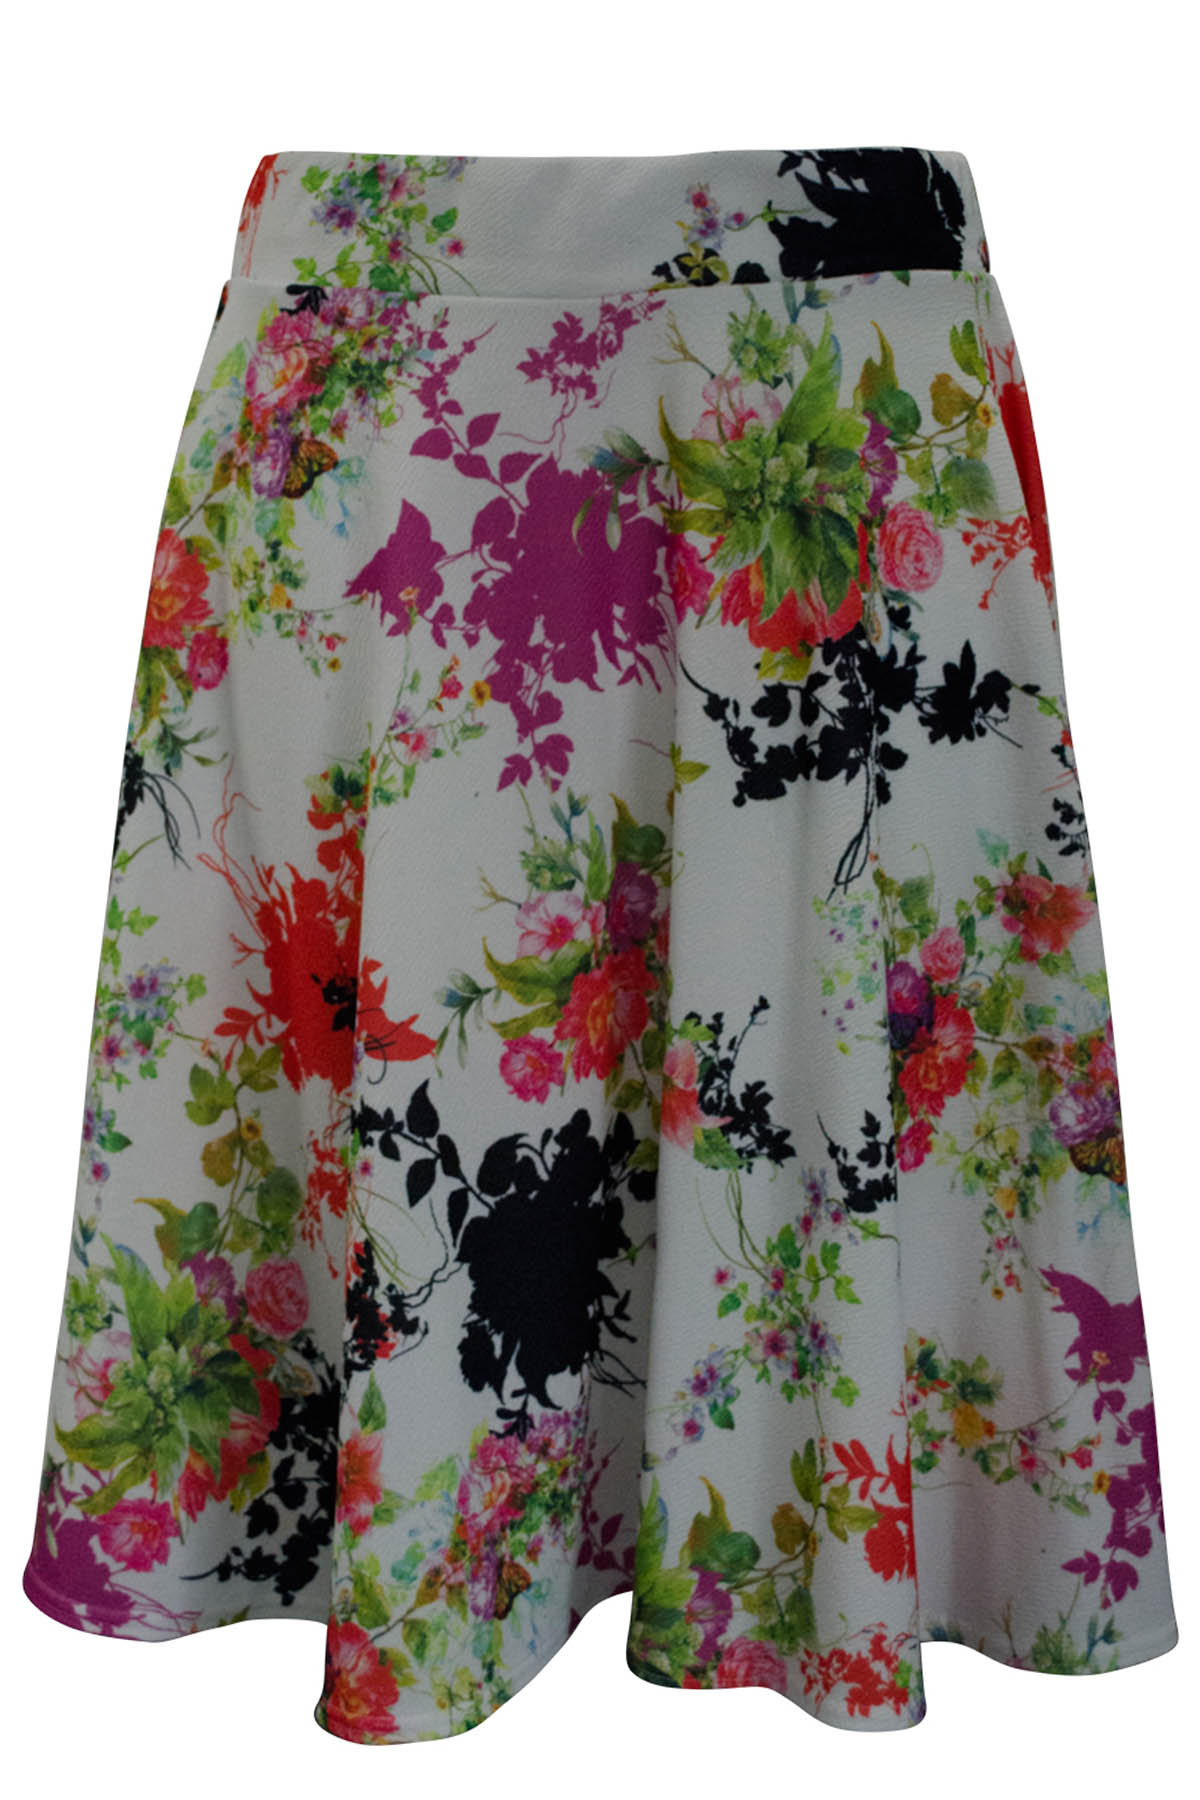 New Ladies Skirts Plus Size Womens Floral Print Skater Knee Long Crepe ...